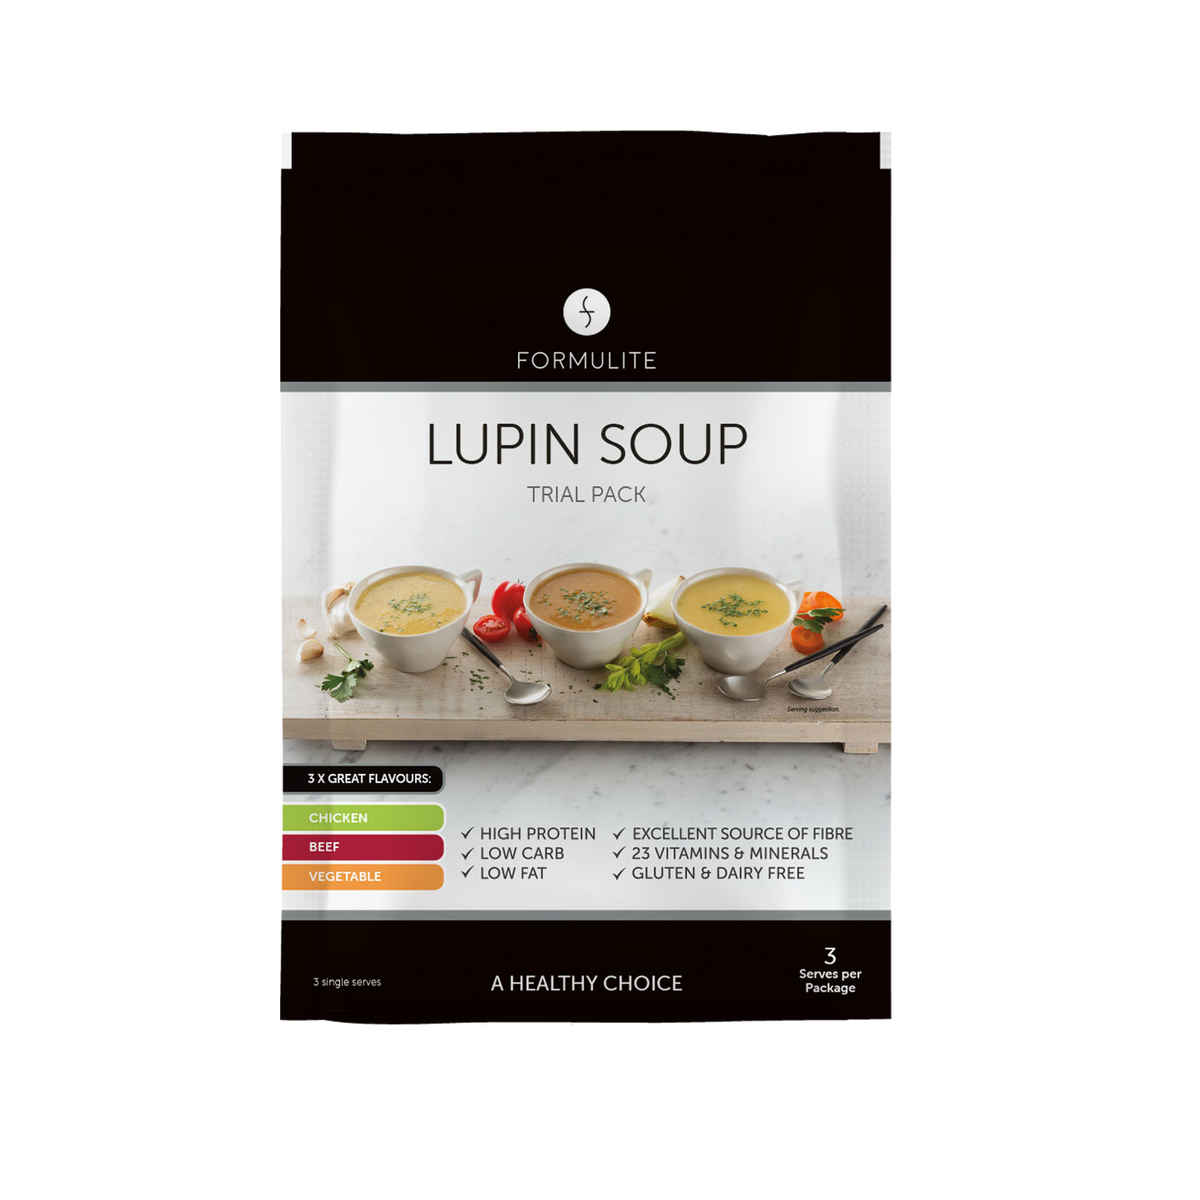 Formulite Lupin Soup Trial Pack 3 Serves